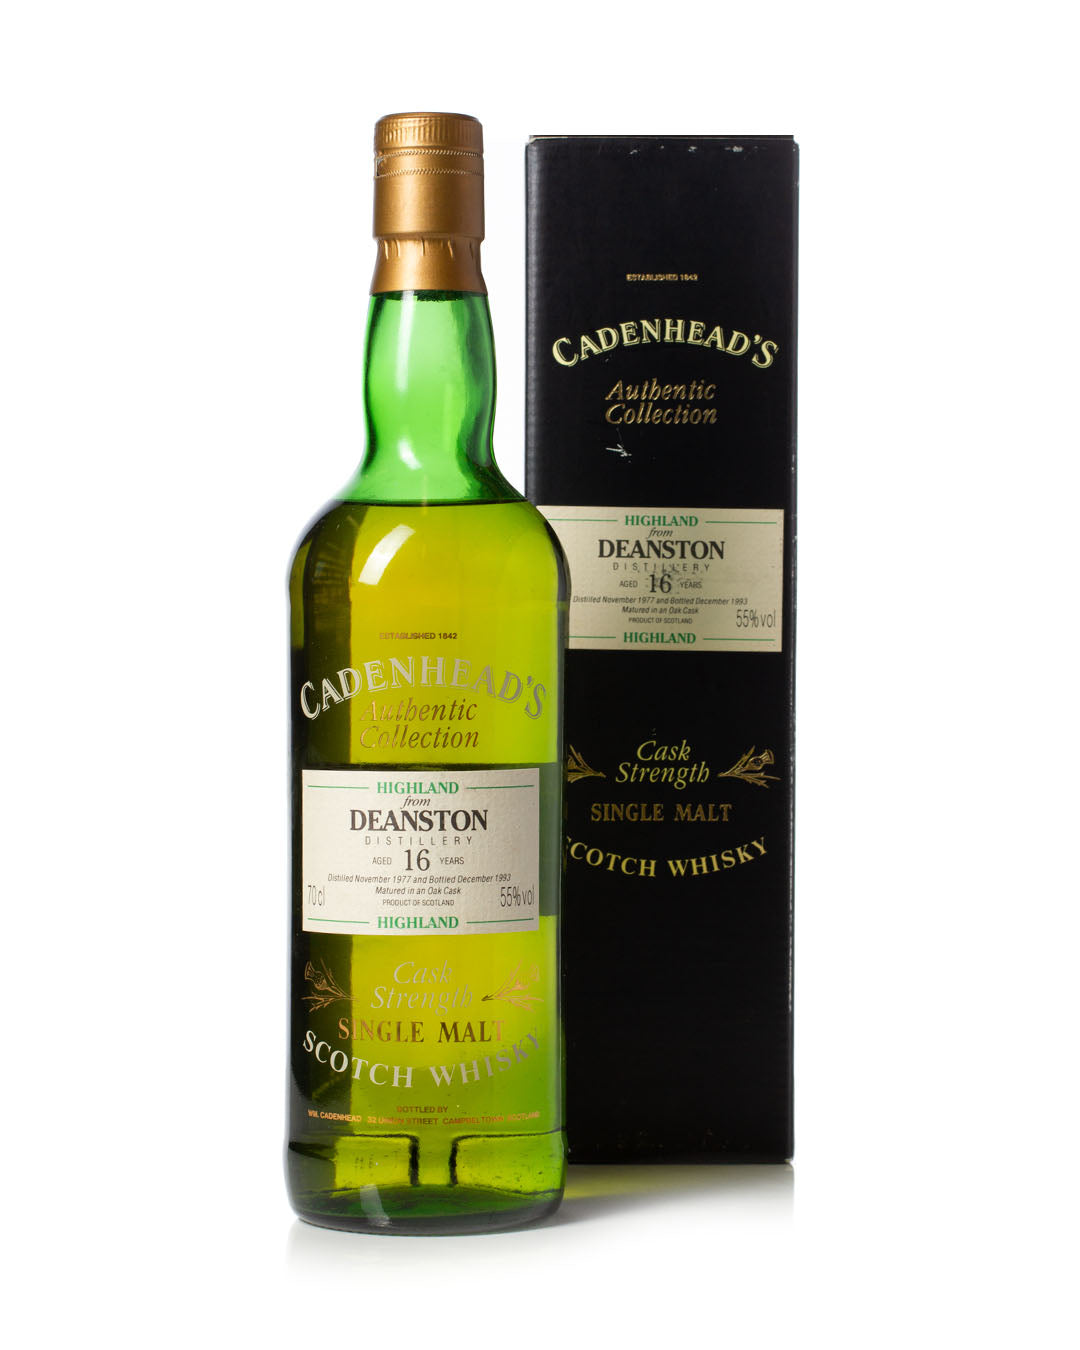 Buy Deanston 1977 16 Year Old Cadenhead's Authentic Collection whisky online